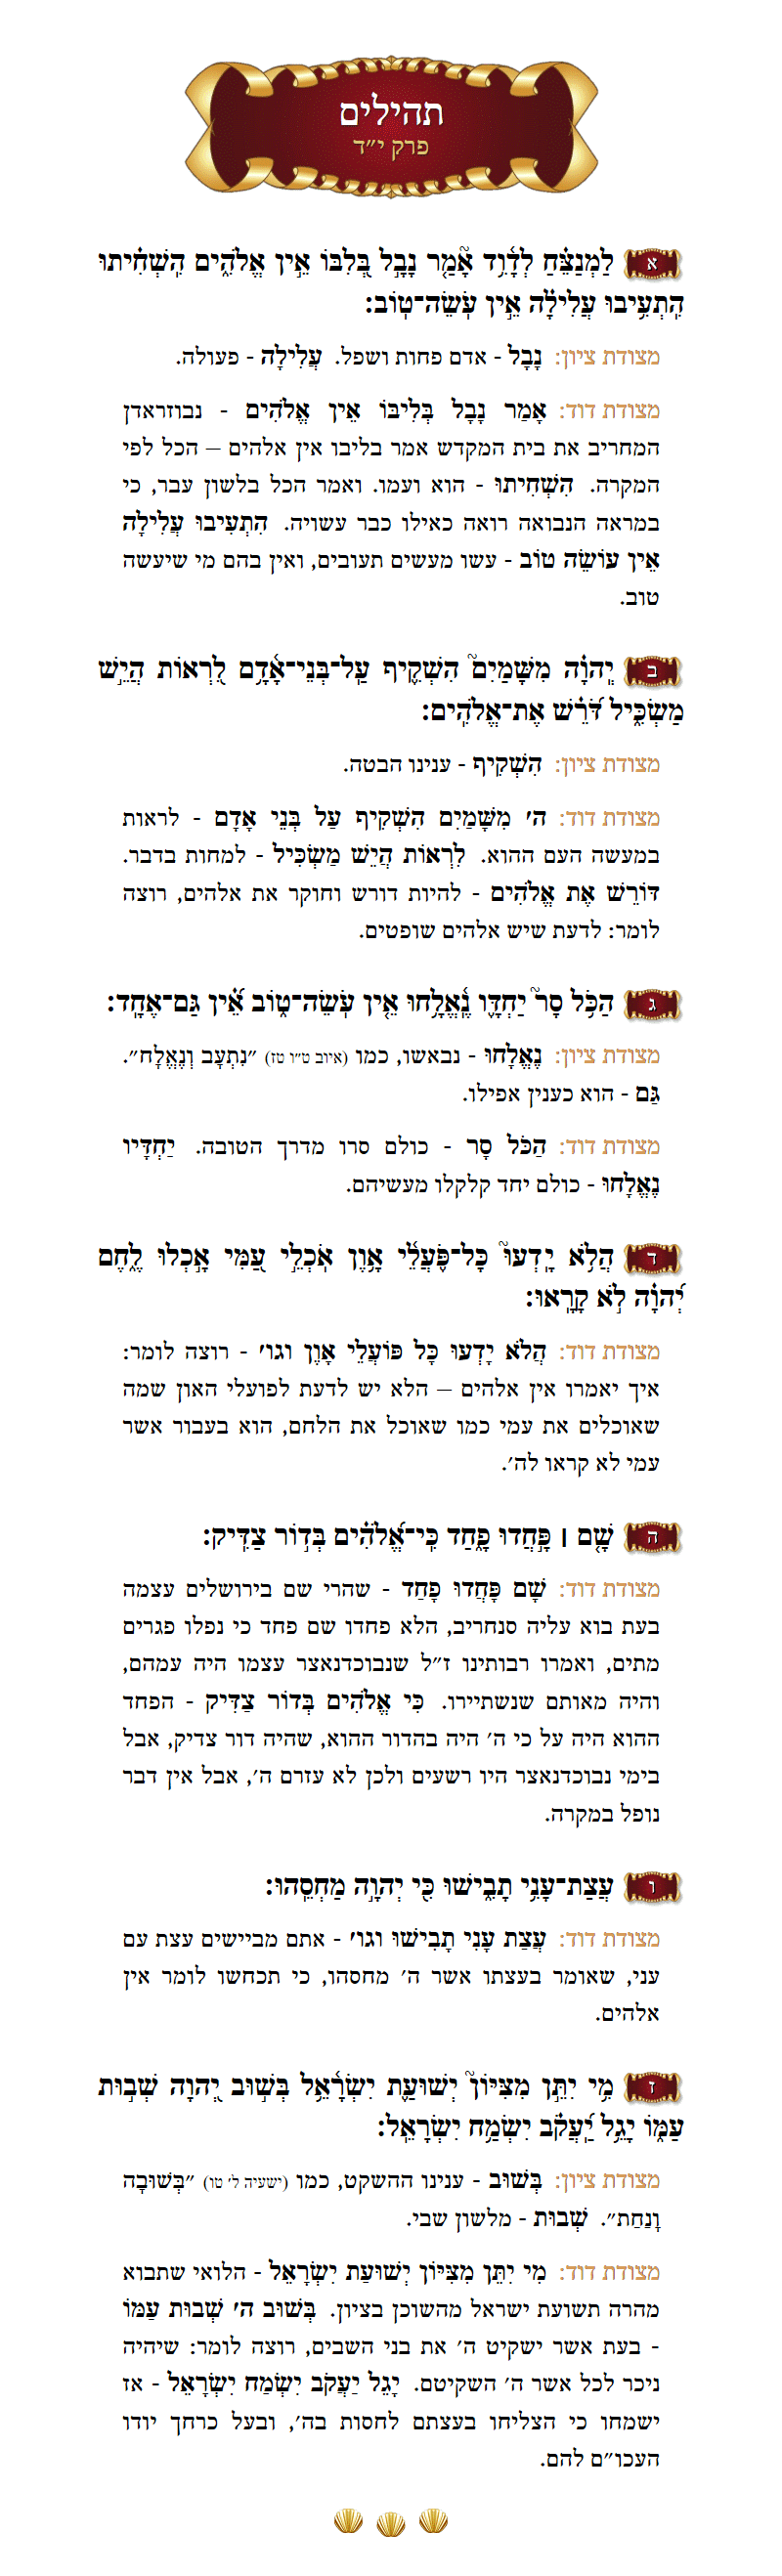 Sefer Tehillim Chapter 14 with commentary